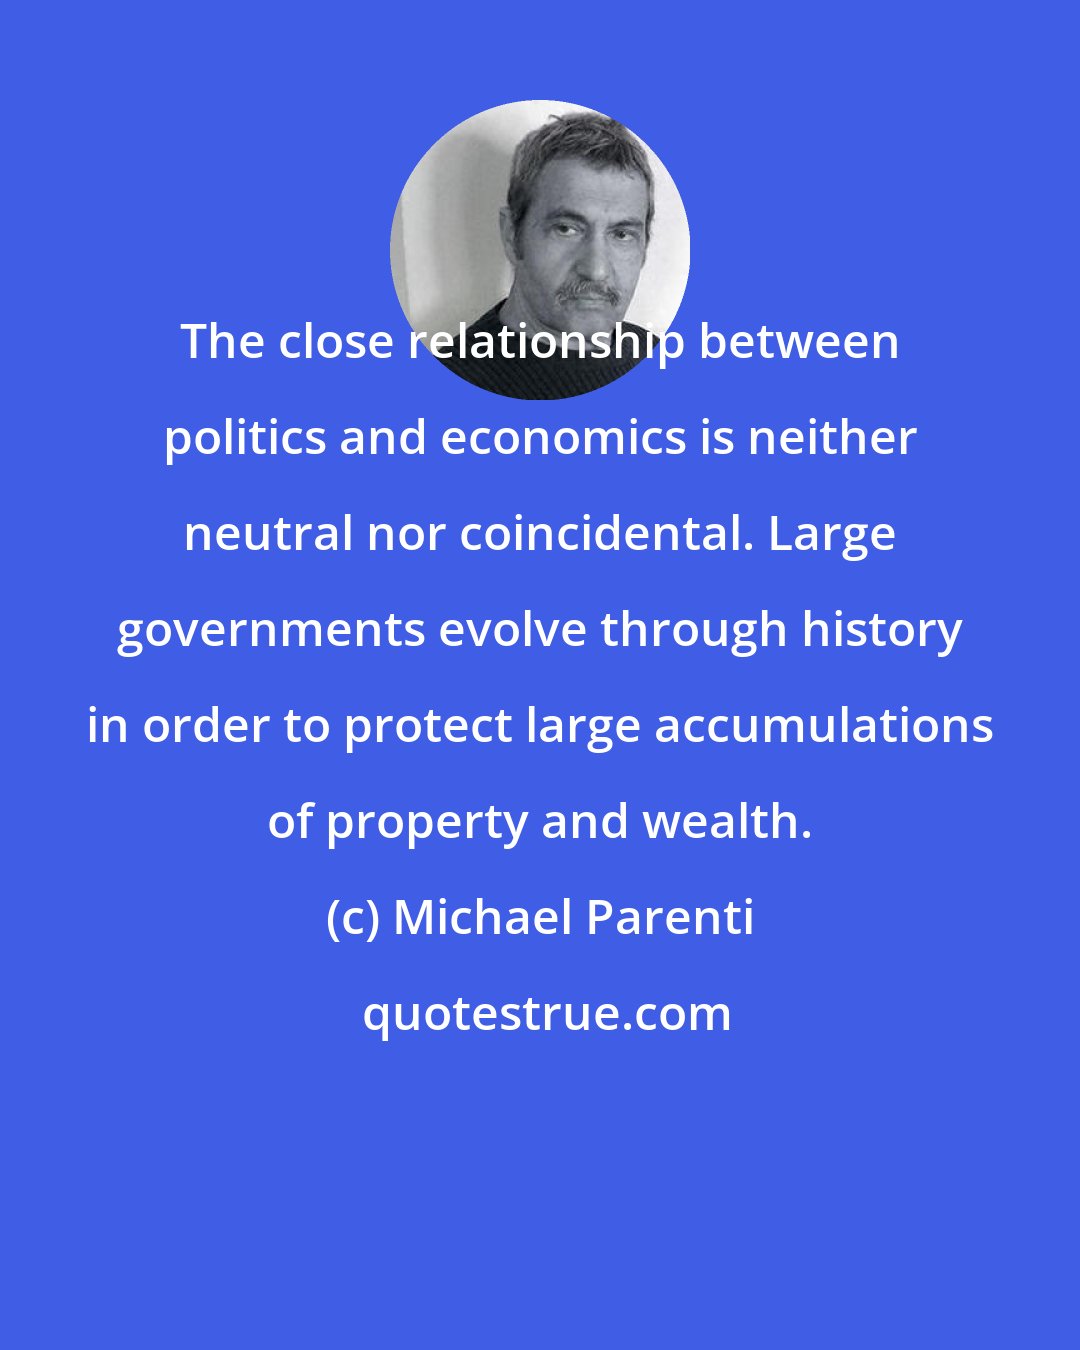 Michael Parenti: The close relationship between politics and economics is neither neutral nor coincidental. Large governments evolve through history in order to protect large accumulations of property and wealth.